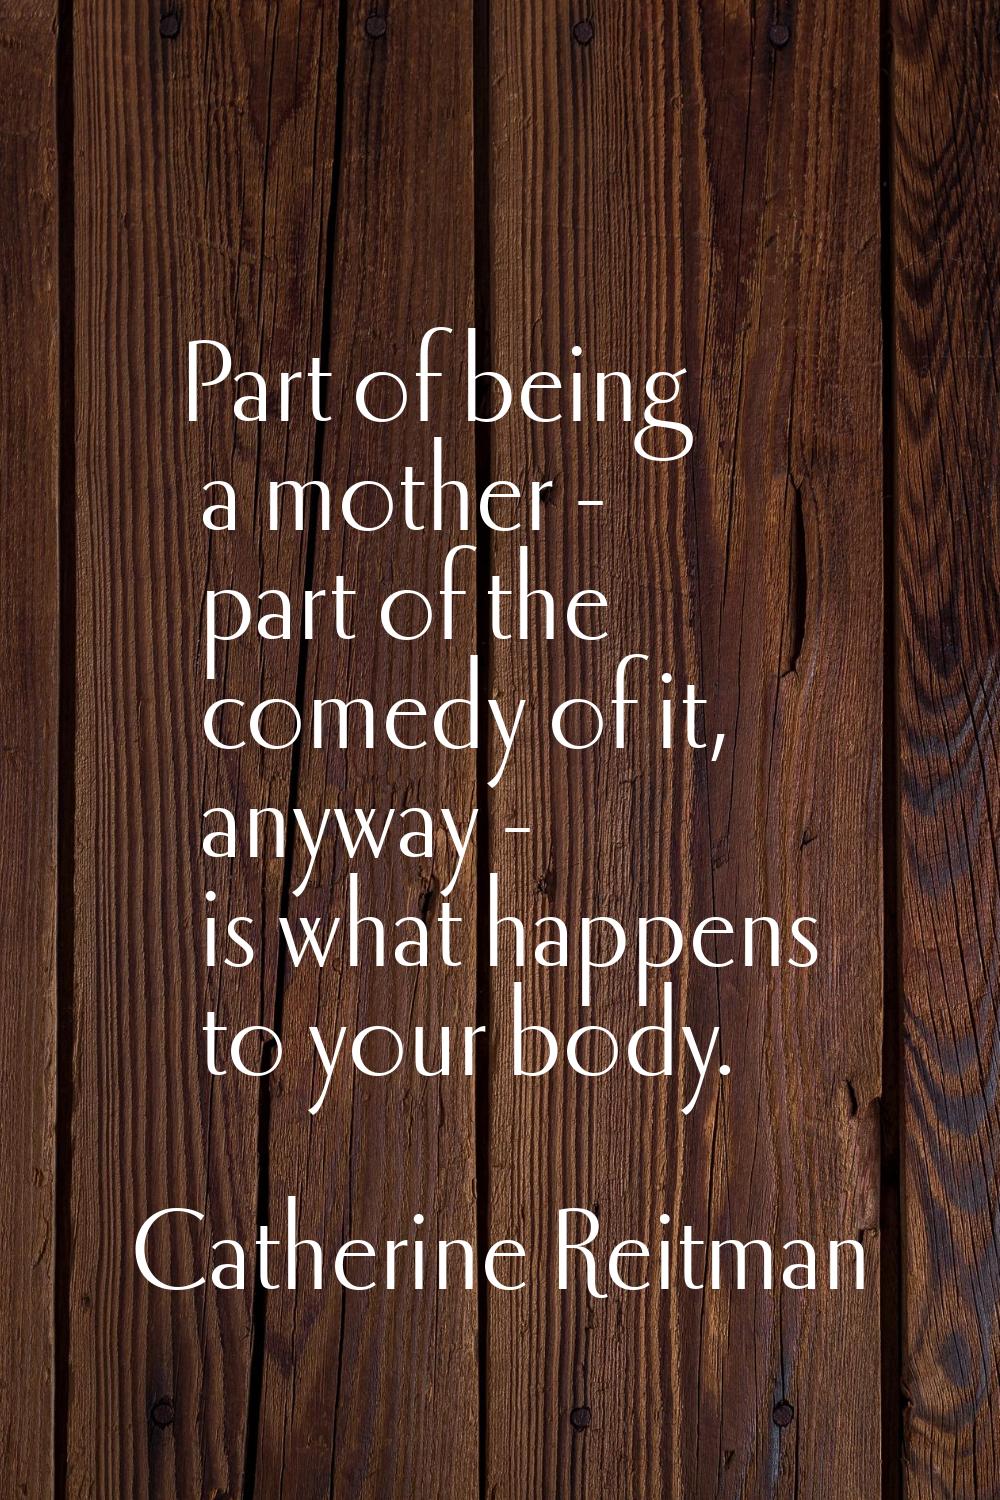 Part of being a mother - part of the comedy of it, anyway - is what happens to your body.